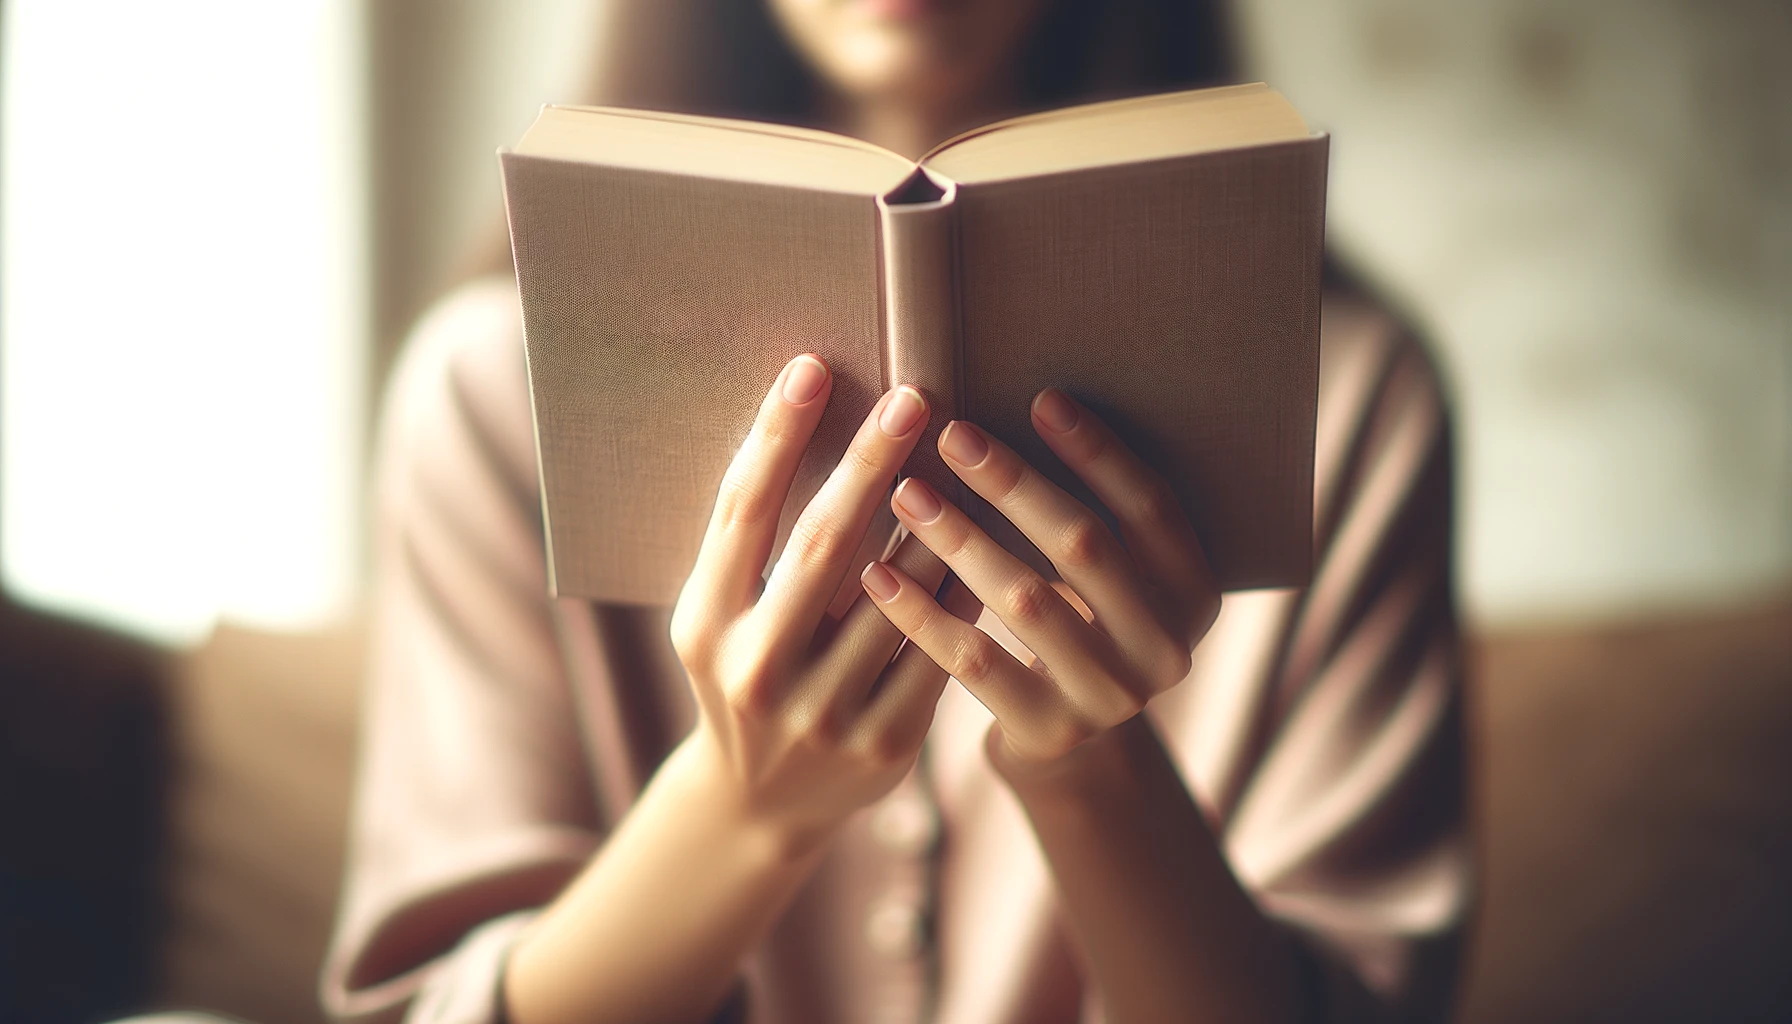 A minimalist image showing a person in a softly blurred background, subtly holding a book. The focus is on the act of reading, with minimal emphasis on the person's hands and fingers, capturing the essence of being engrossed in a book.